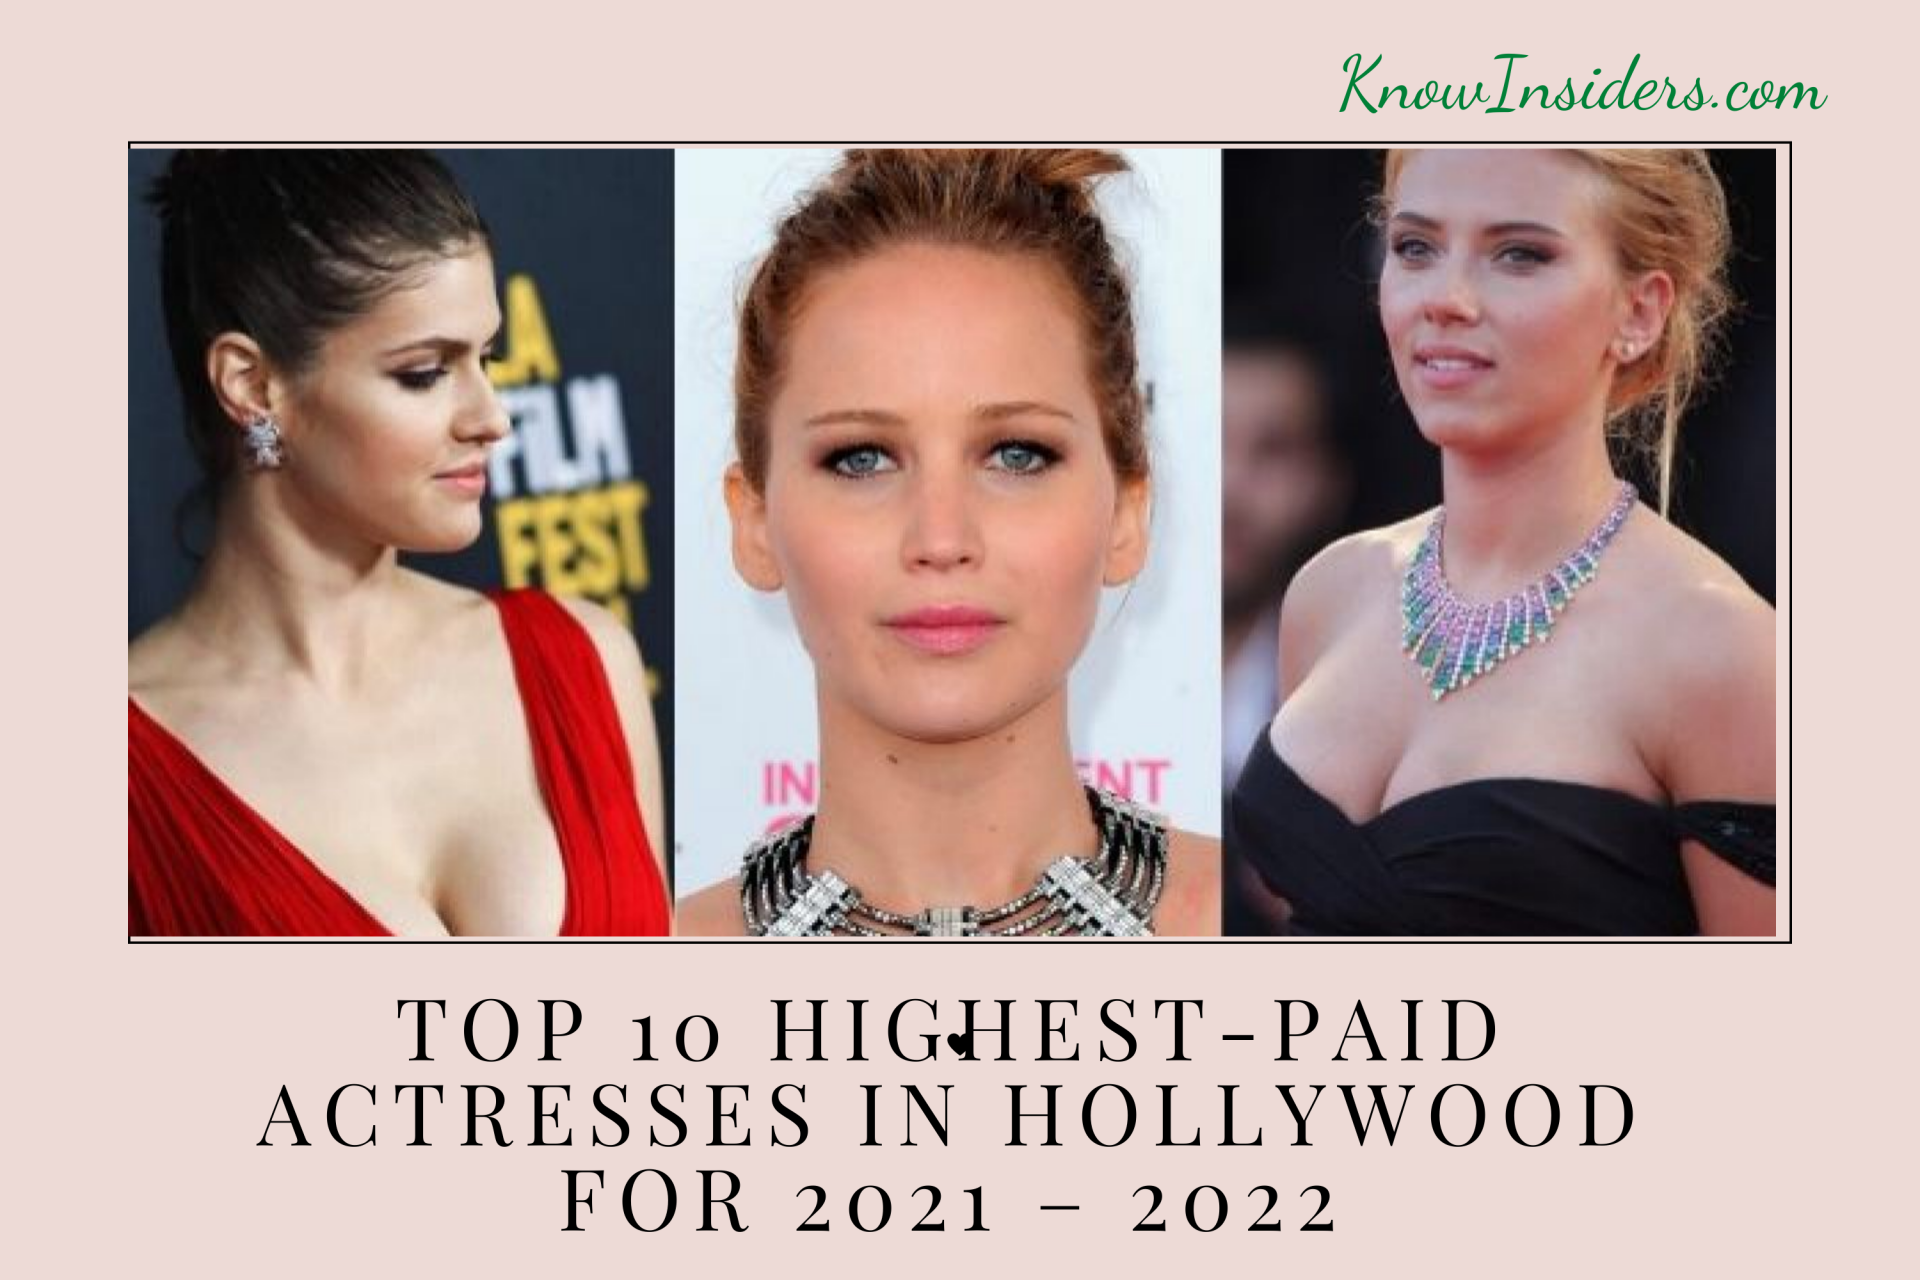 Top 10 Highest-Paid Actresses in Hollywood 2022/2023